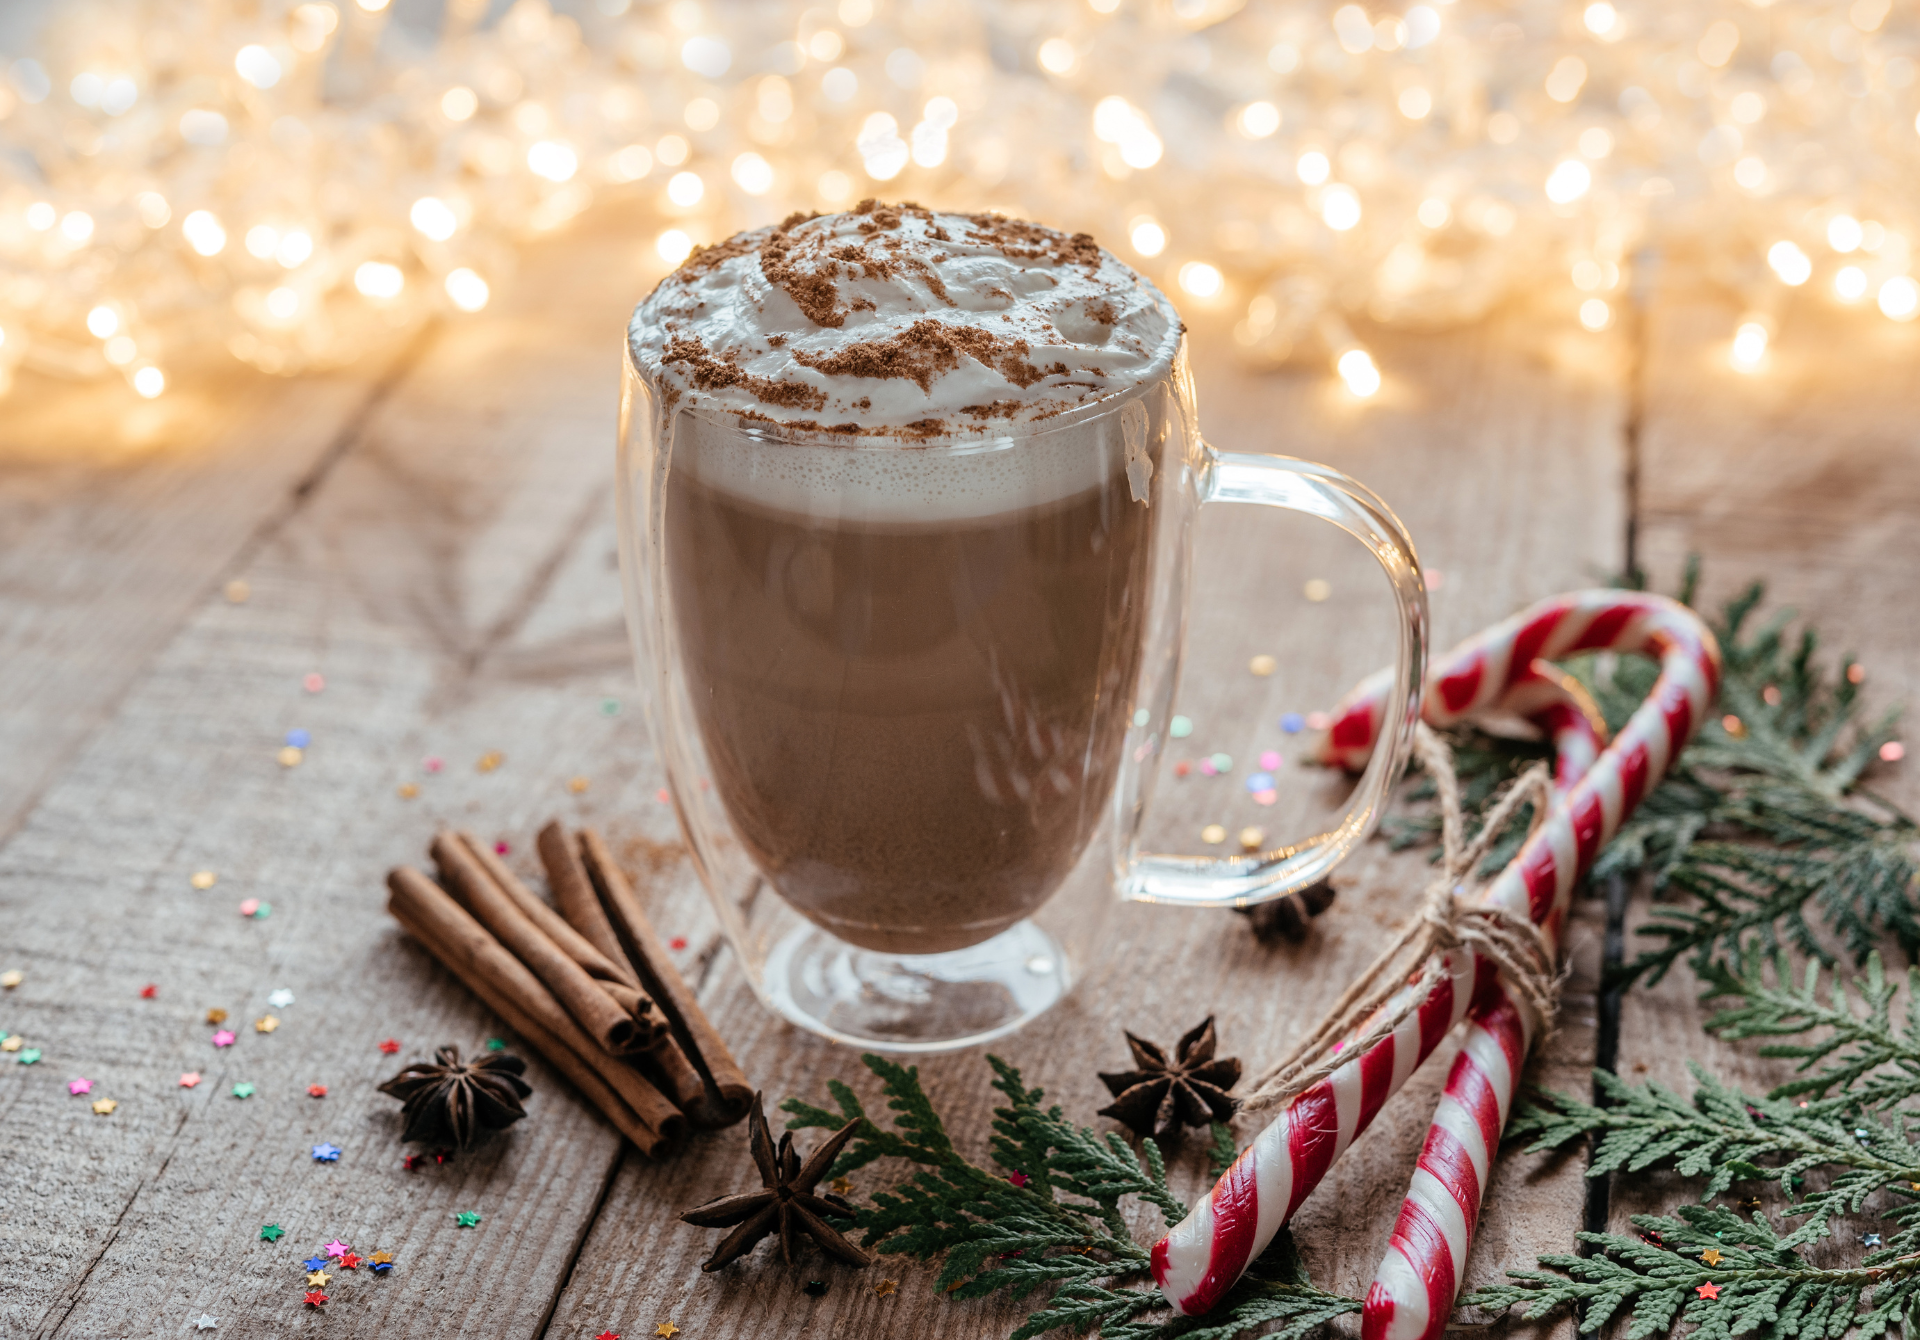 8 Winter Hot Chocolate Recipes to Keep You Warm